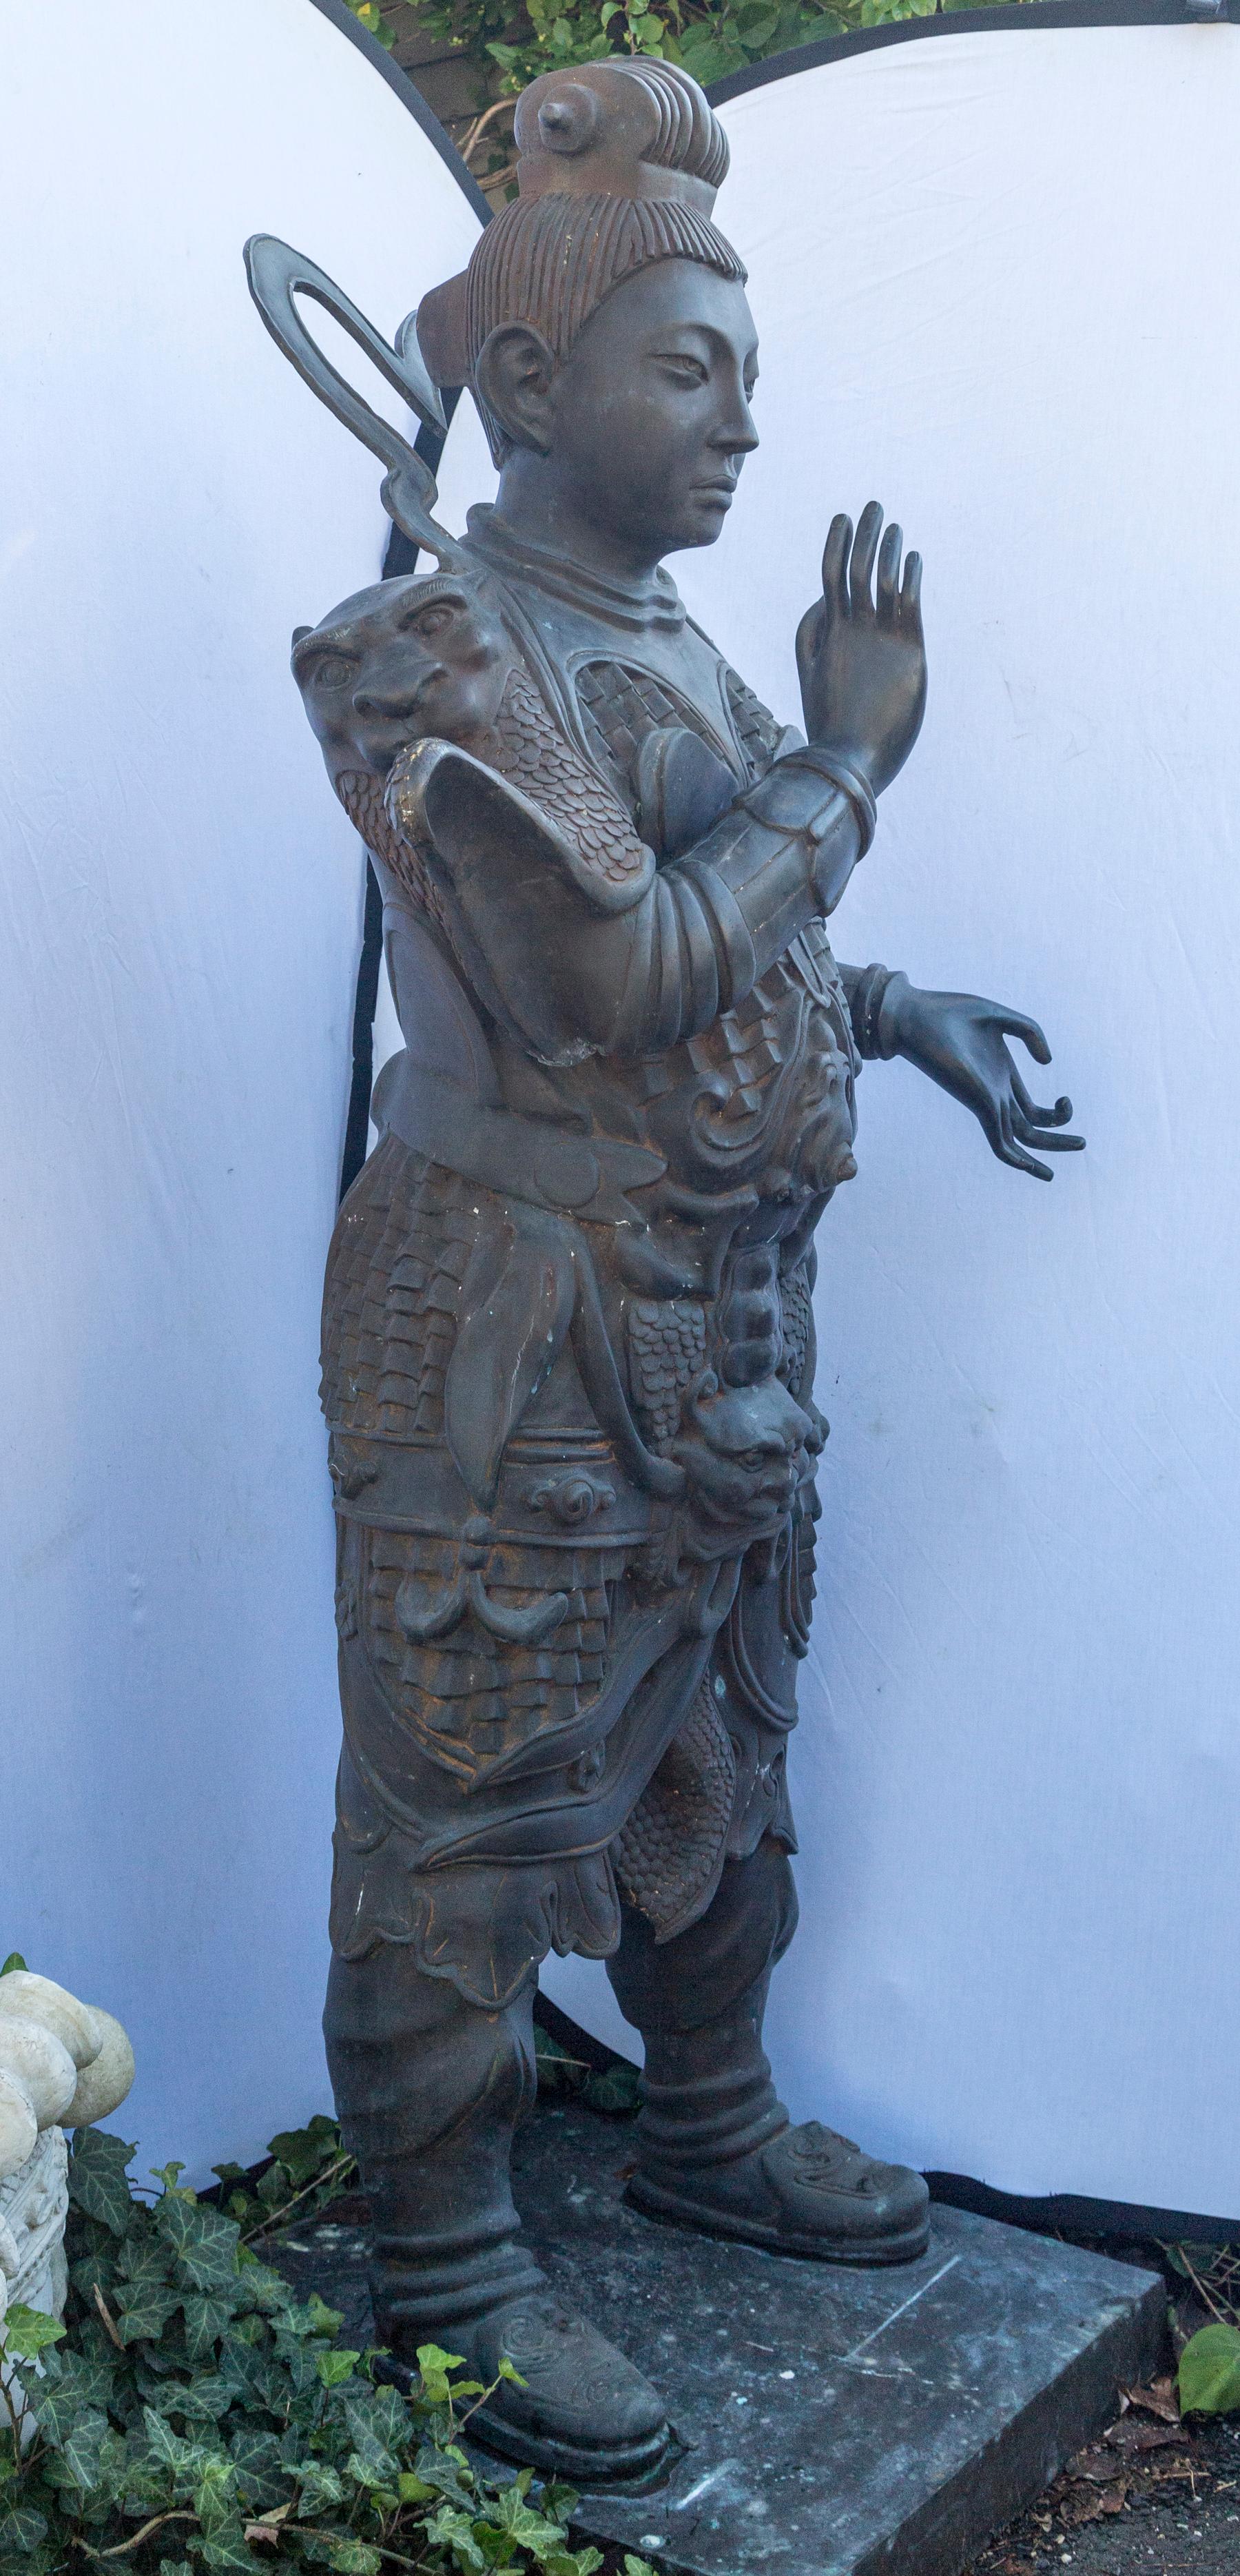 Extremely well cast bronze, which leads us to believe it was crafted in Italy, and not in China. Note the animal head masks on his shoulders, his armor, more animal head masks below his chest, and his boots.
He stands 71 inches tall, and from